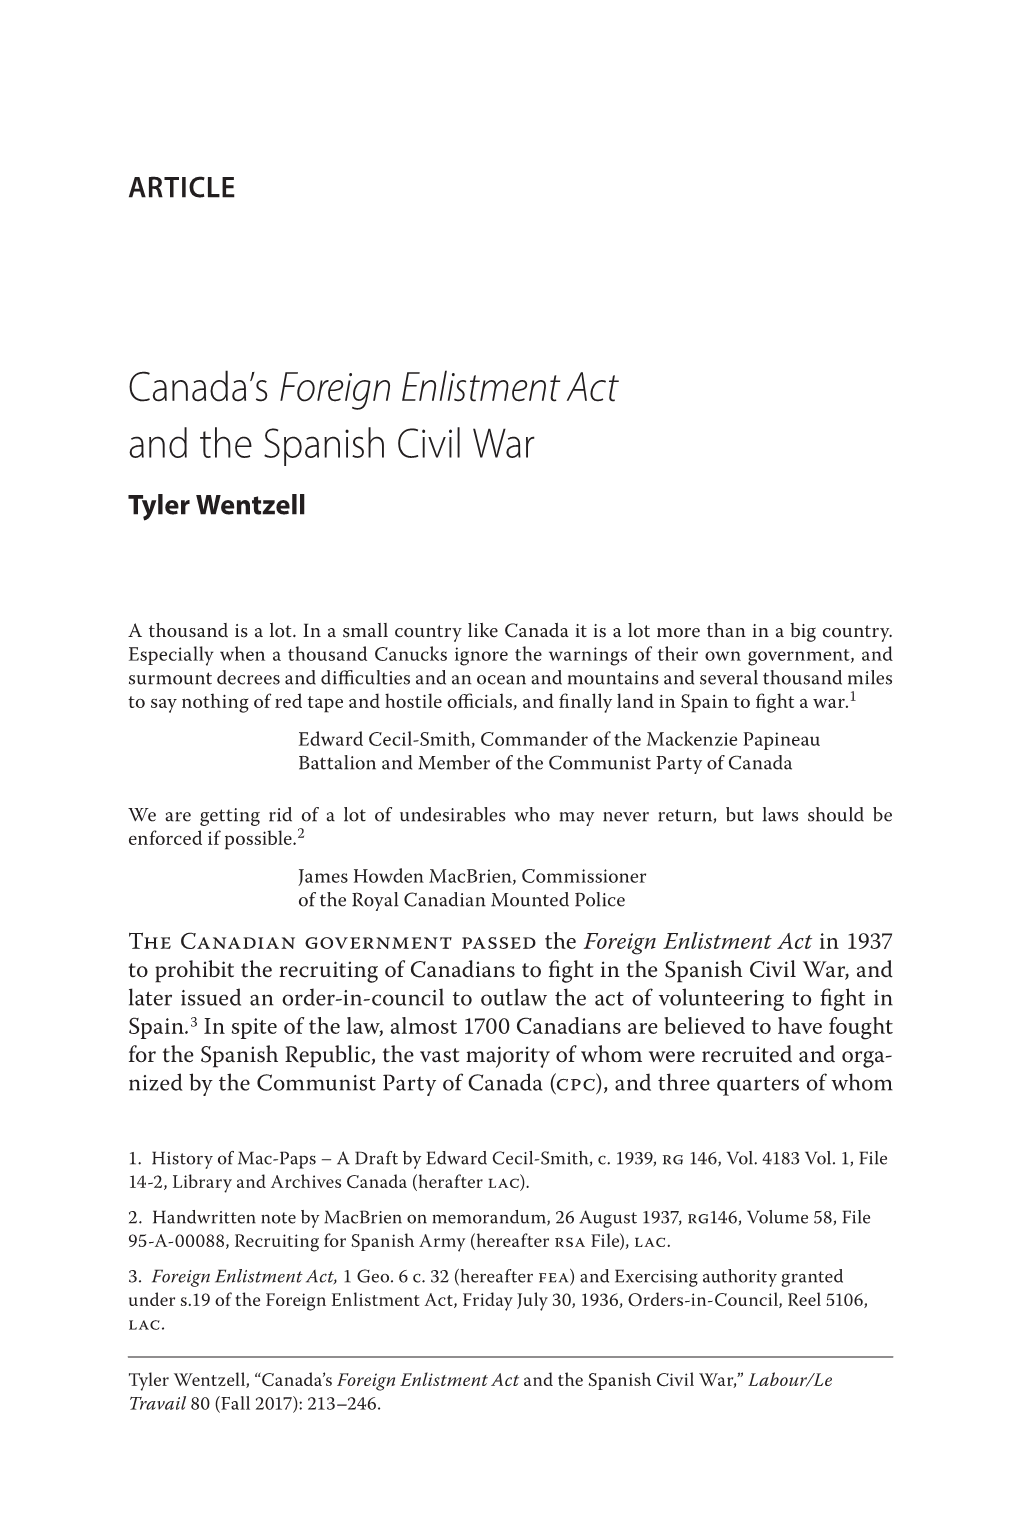 Canada's Foreign Enlistment Act and the Spanish Civil